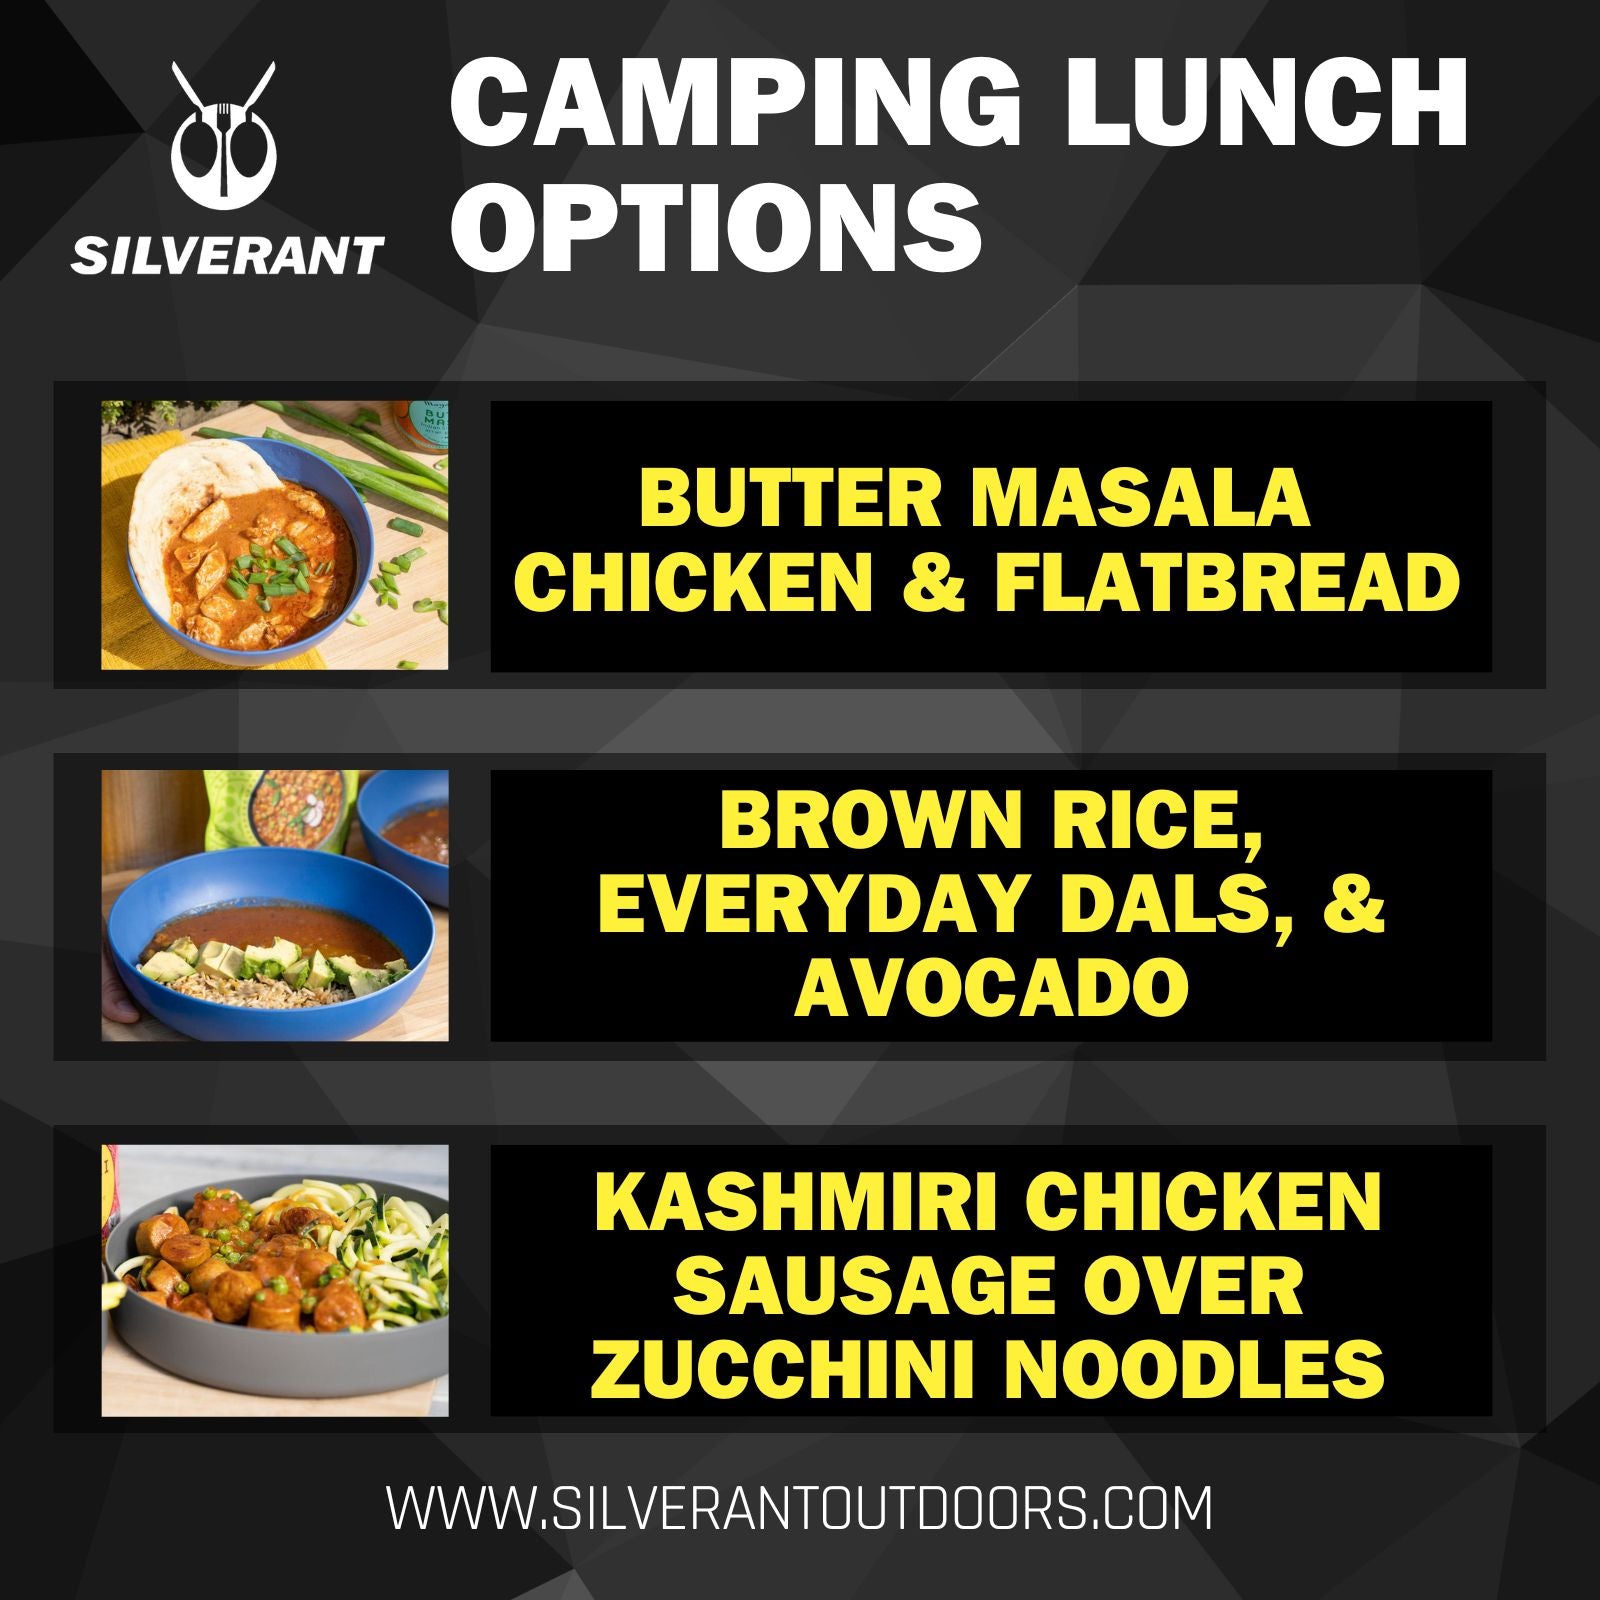 Camping Lunch Options